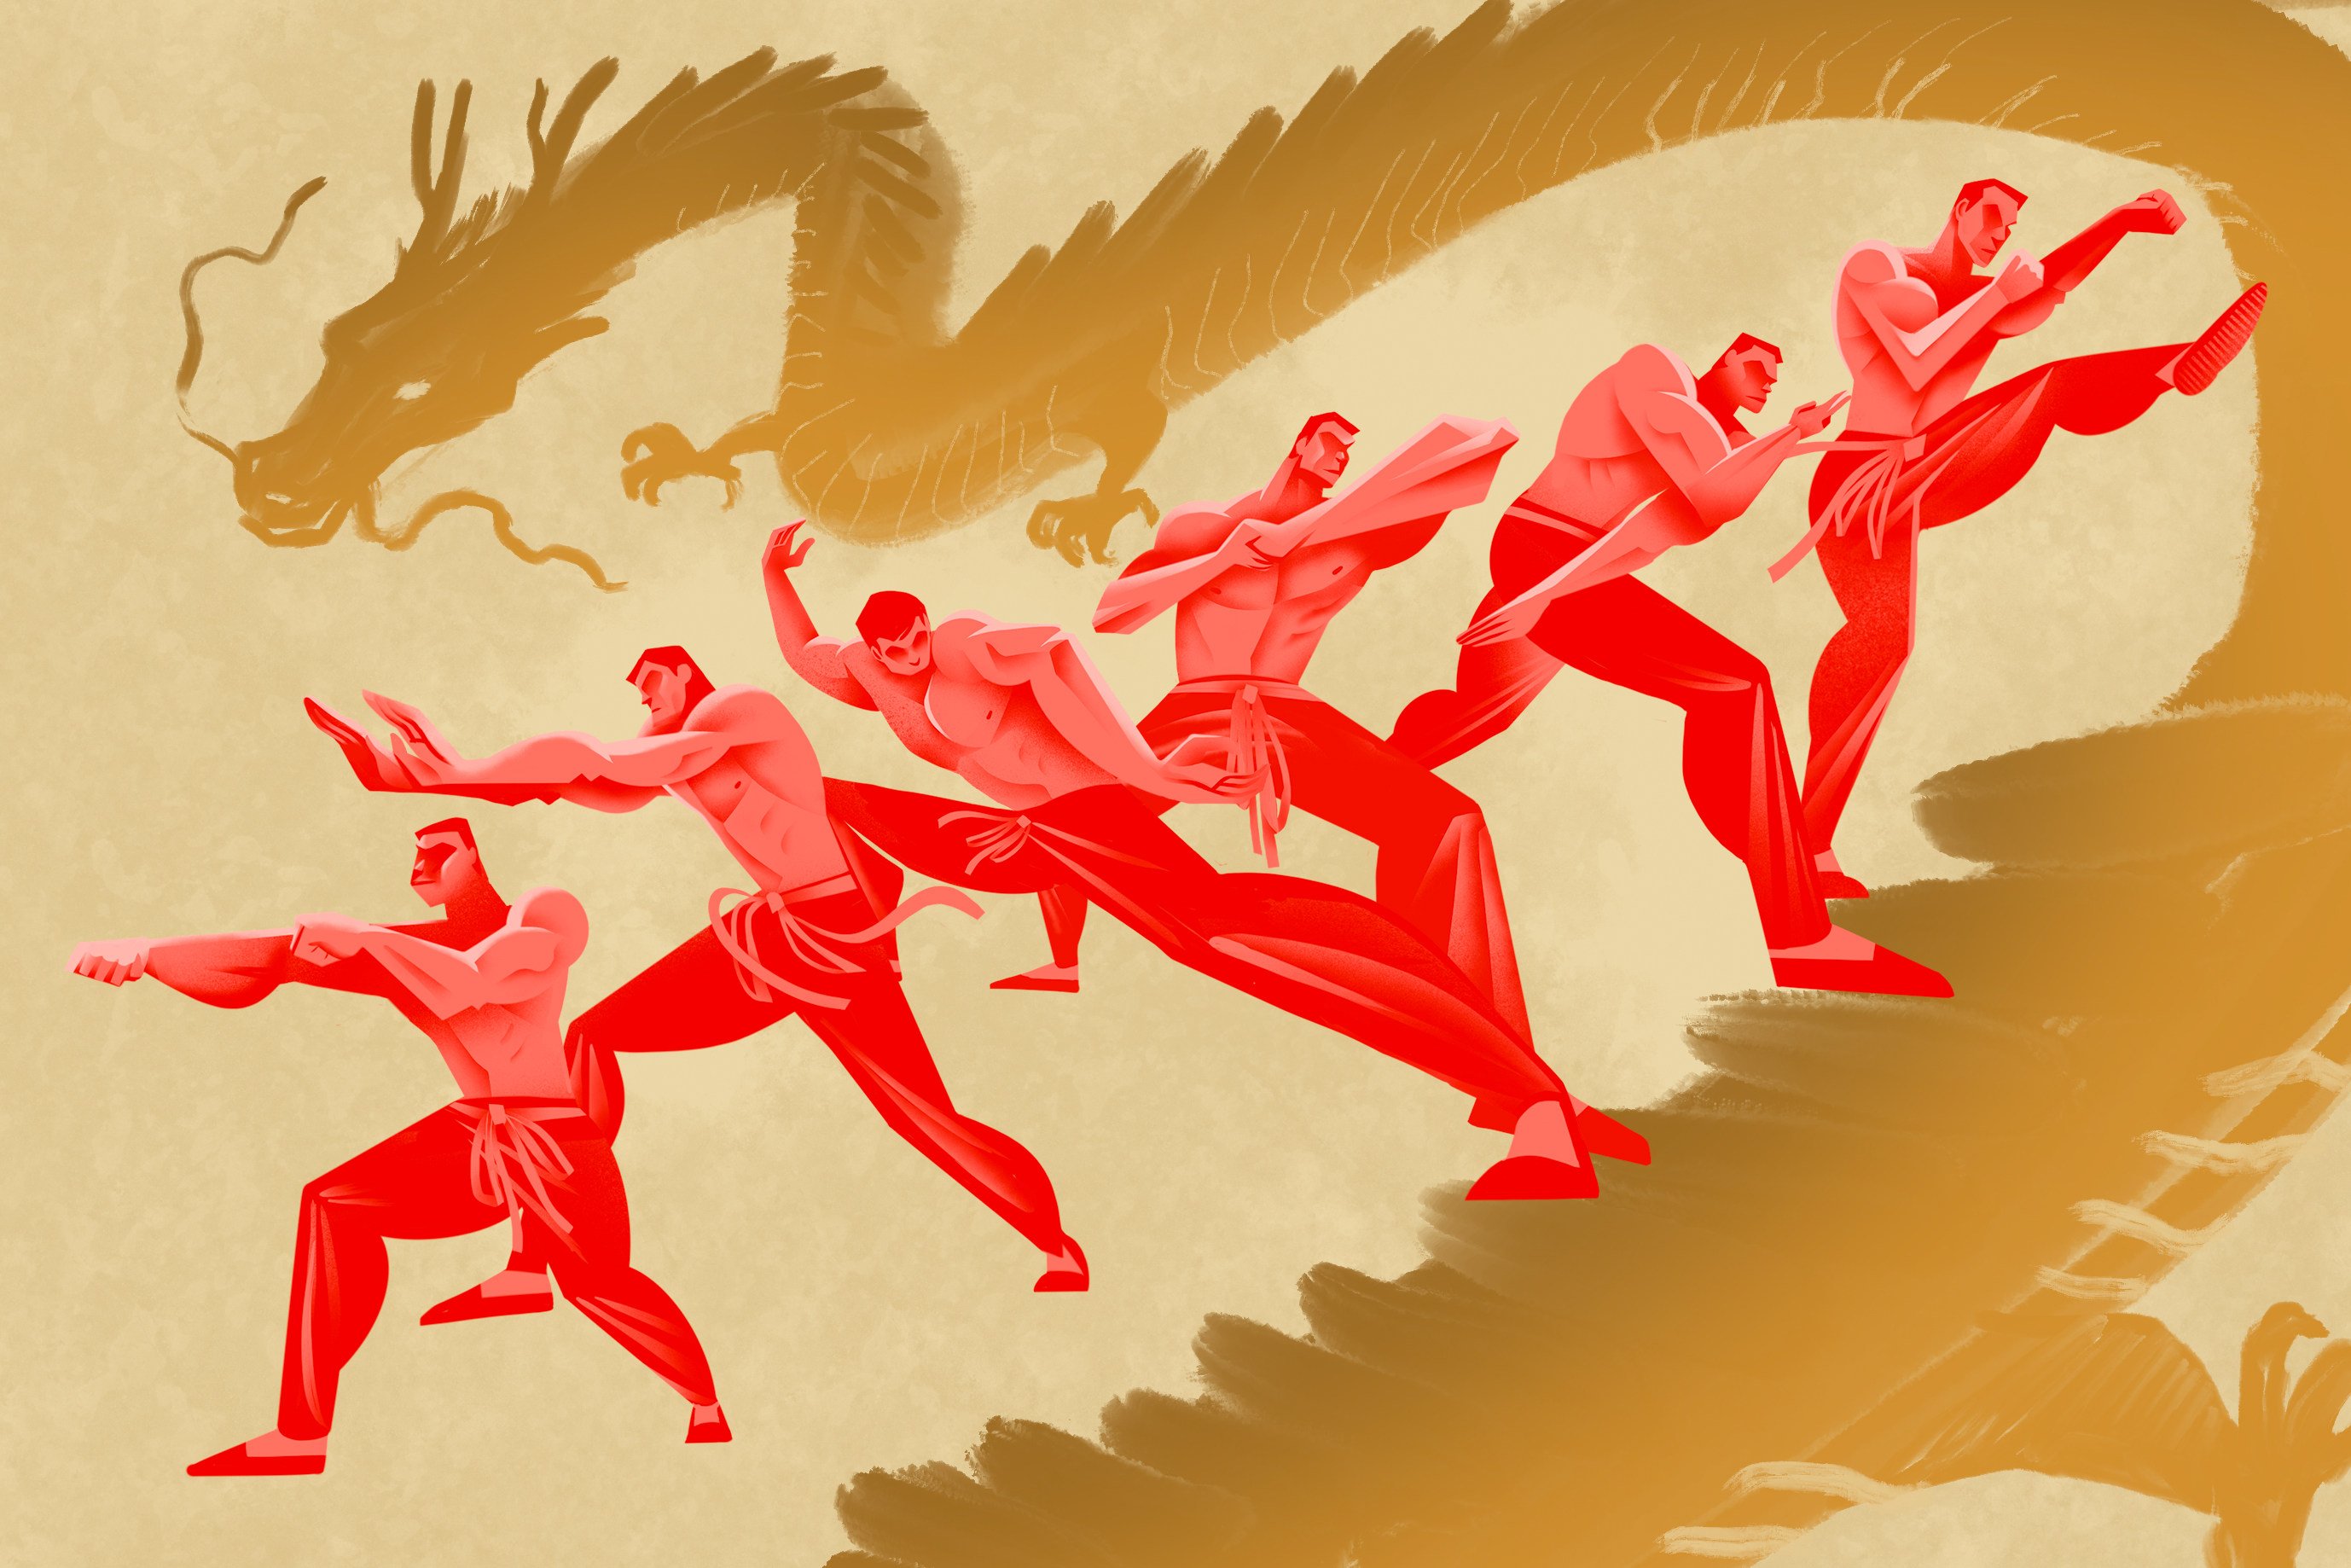 Techniques inspired by 12 animals are associated with a powerful style of Chinese martial arts called xing yi quan. Illustration: Davies Christian Surya